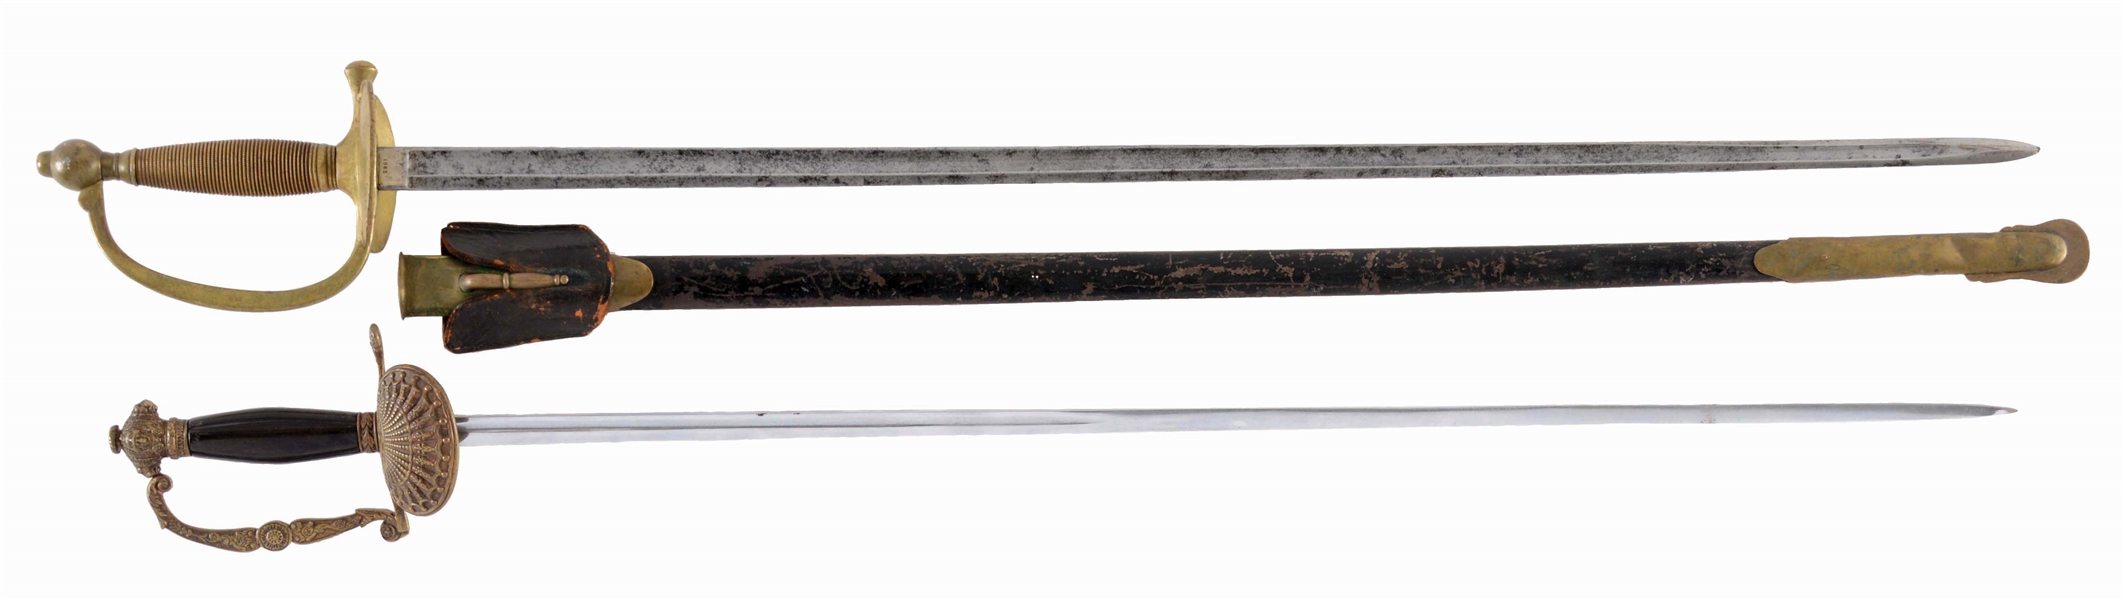 LOT OF 2: MODEL 1840 NCO SWORD AND 1830S FRENCH COURT SWORD.